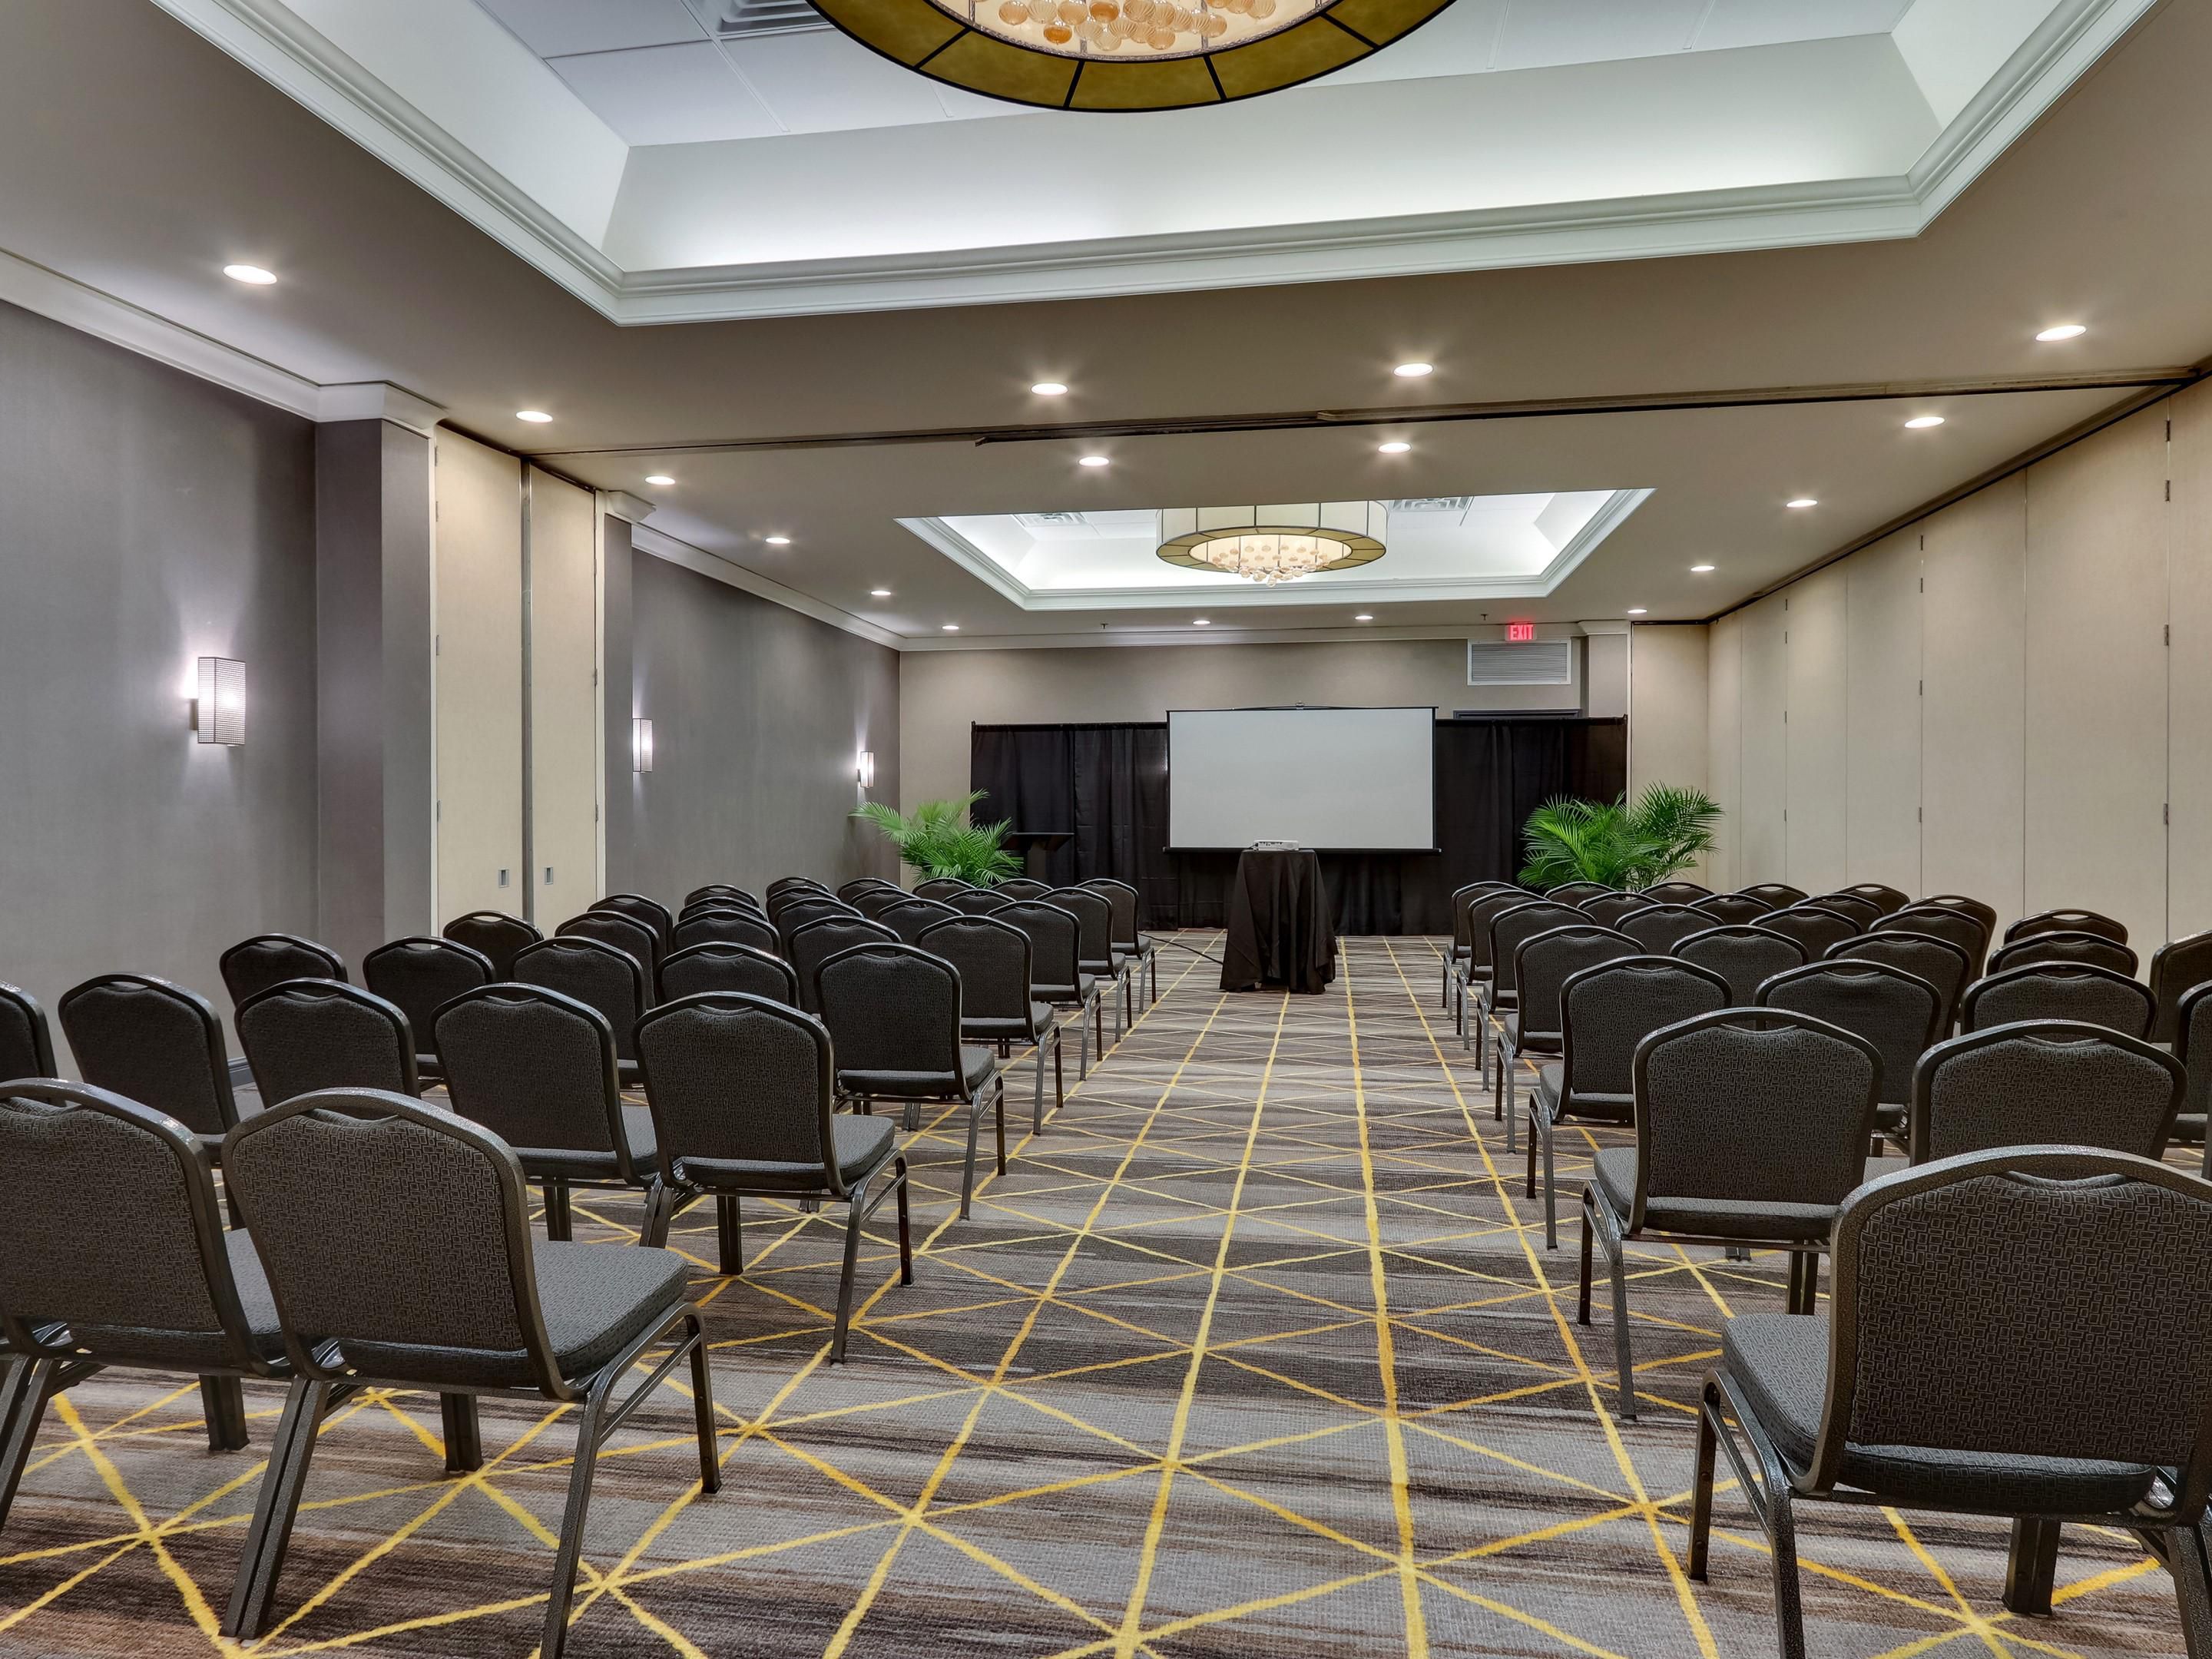 Our helpful staff understands the importance of connecting at your next meeting.  So, whether you're a first-timer or an experienced organizer, we make it easy to plan and book your meeting space so you can focus on creating moments that matter.